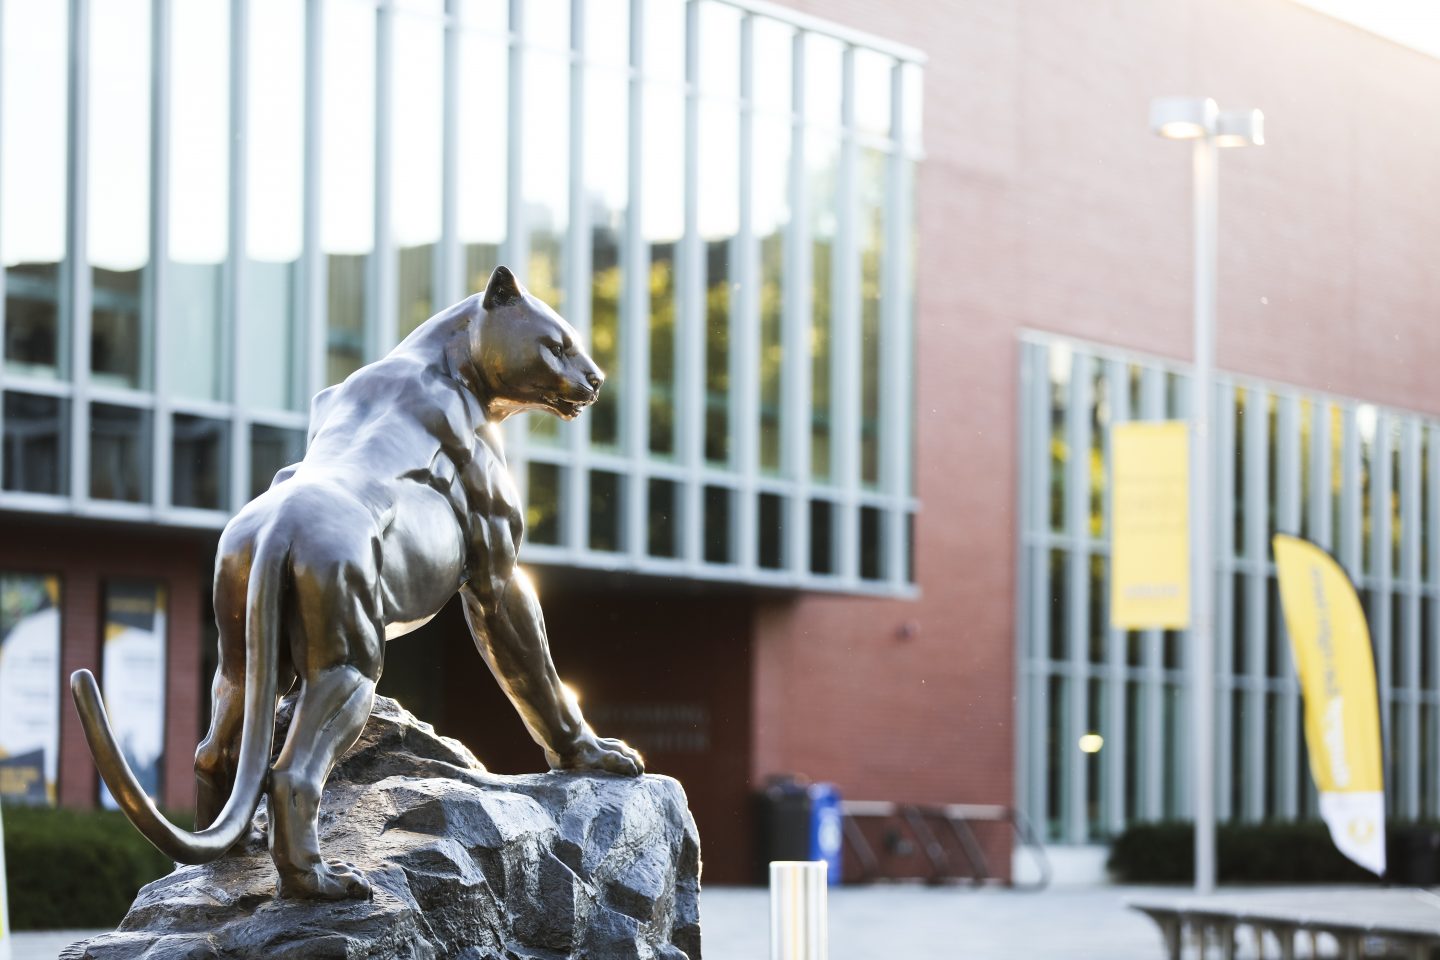 The bronze statue of ӰƬ' Panther mascot in front of the Center for Recreation and Sports